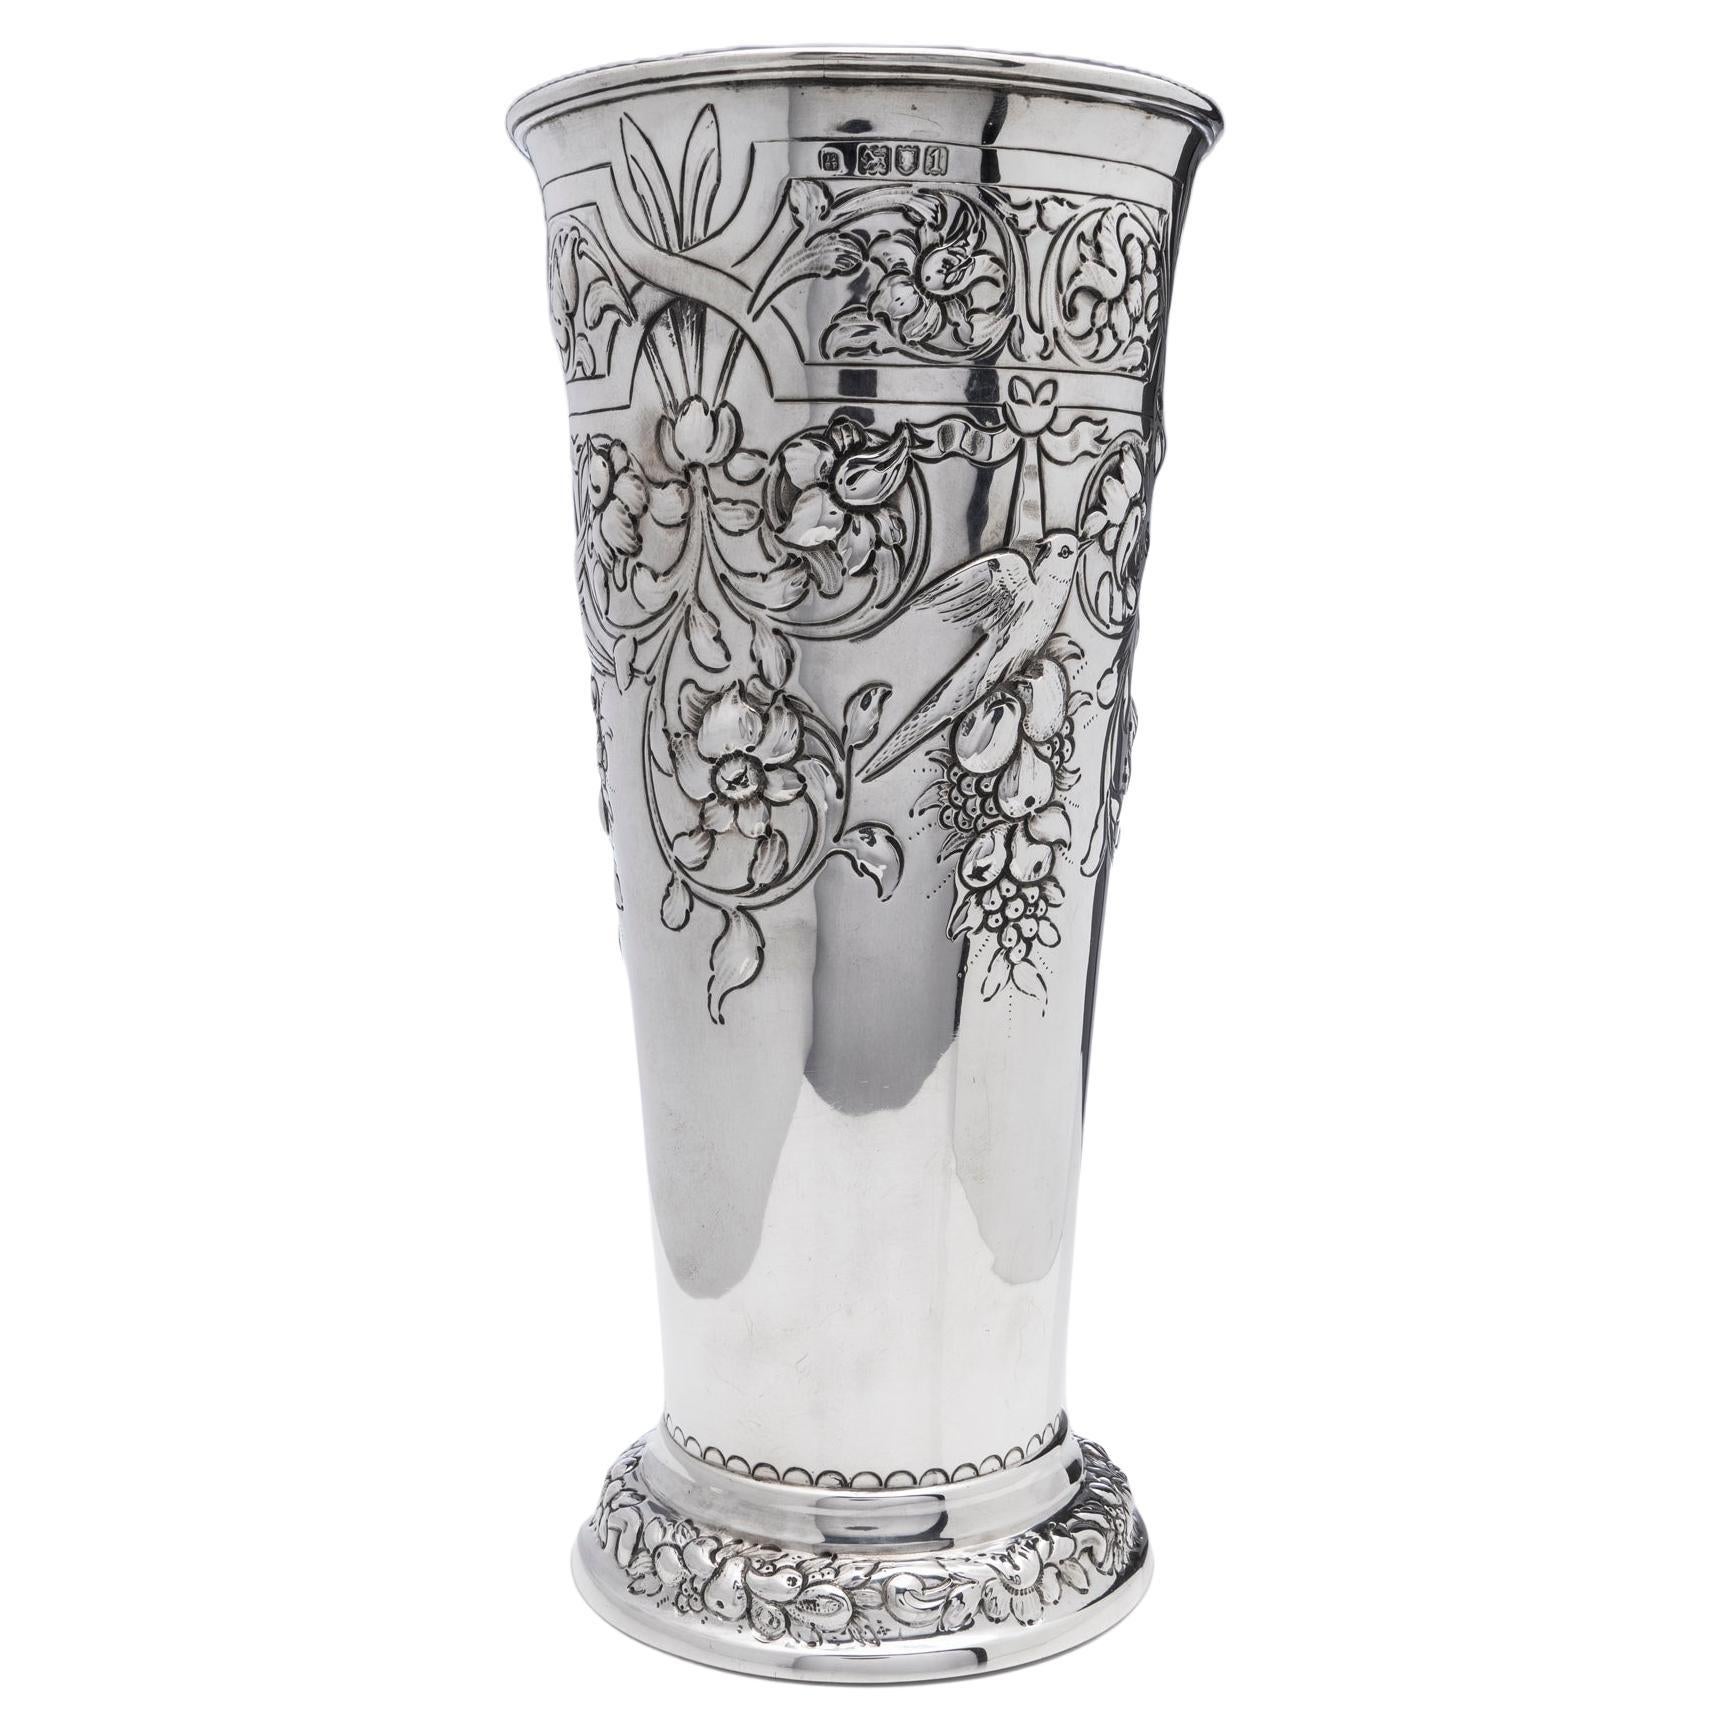 Antique Silver Vase Decorated with Floral Motifs For Sale